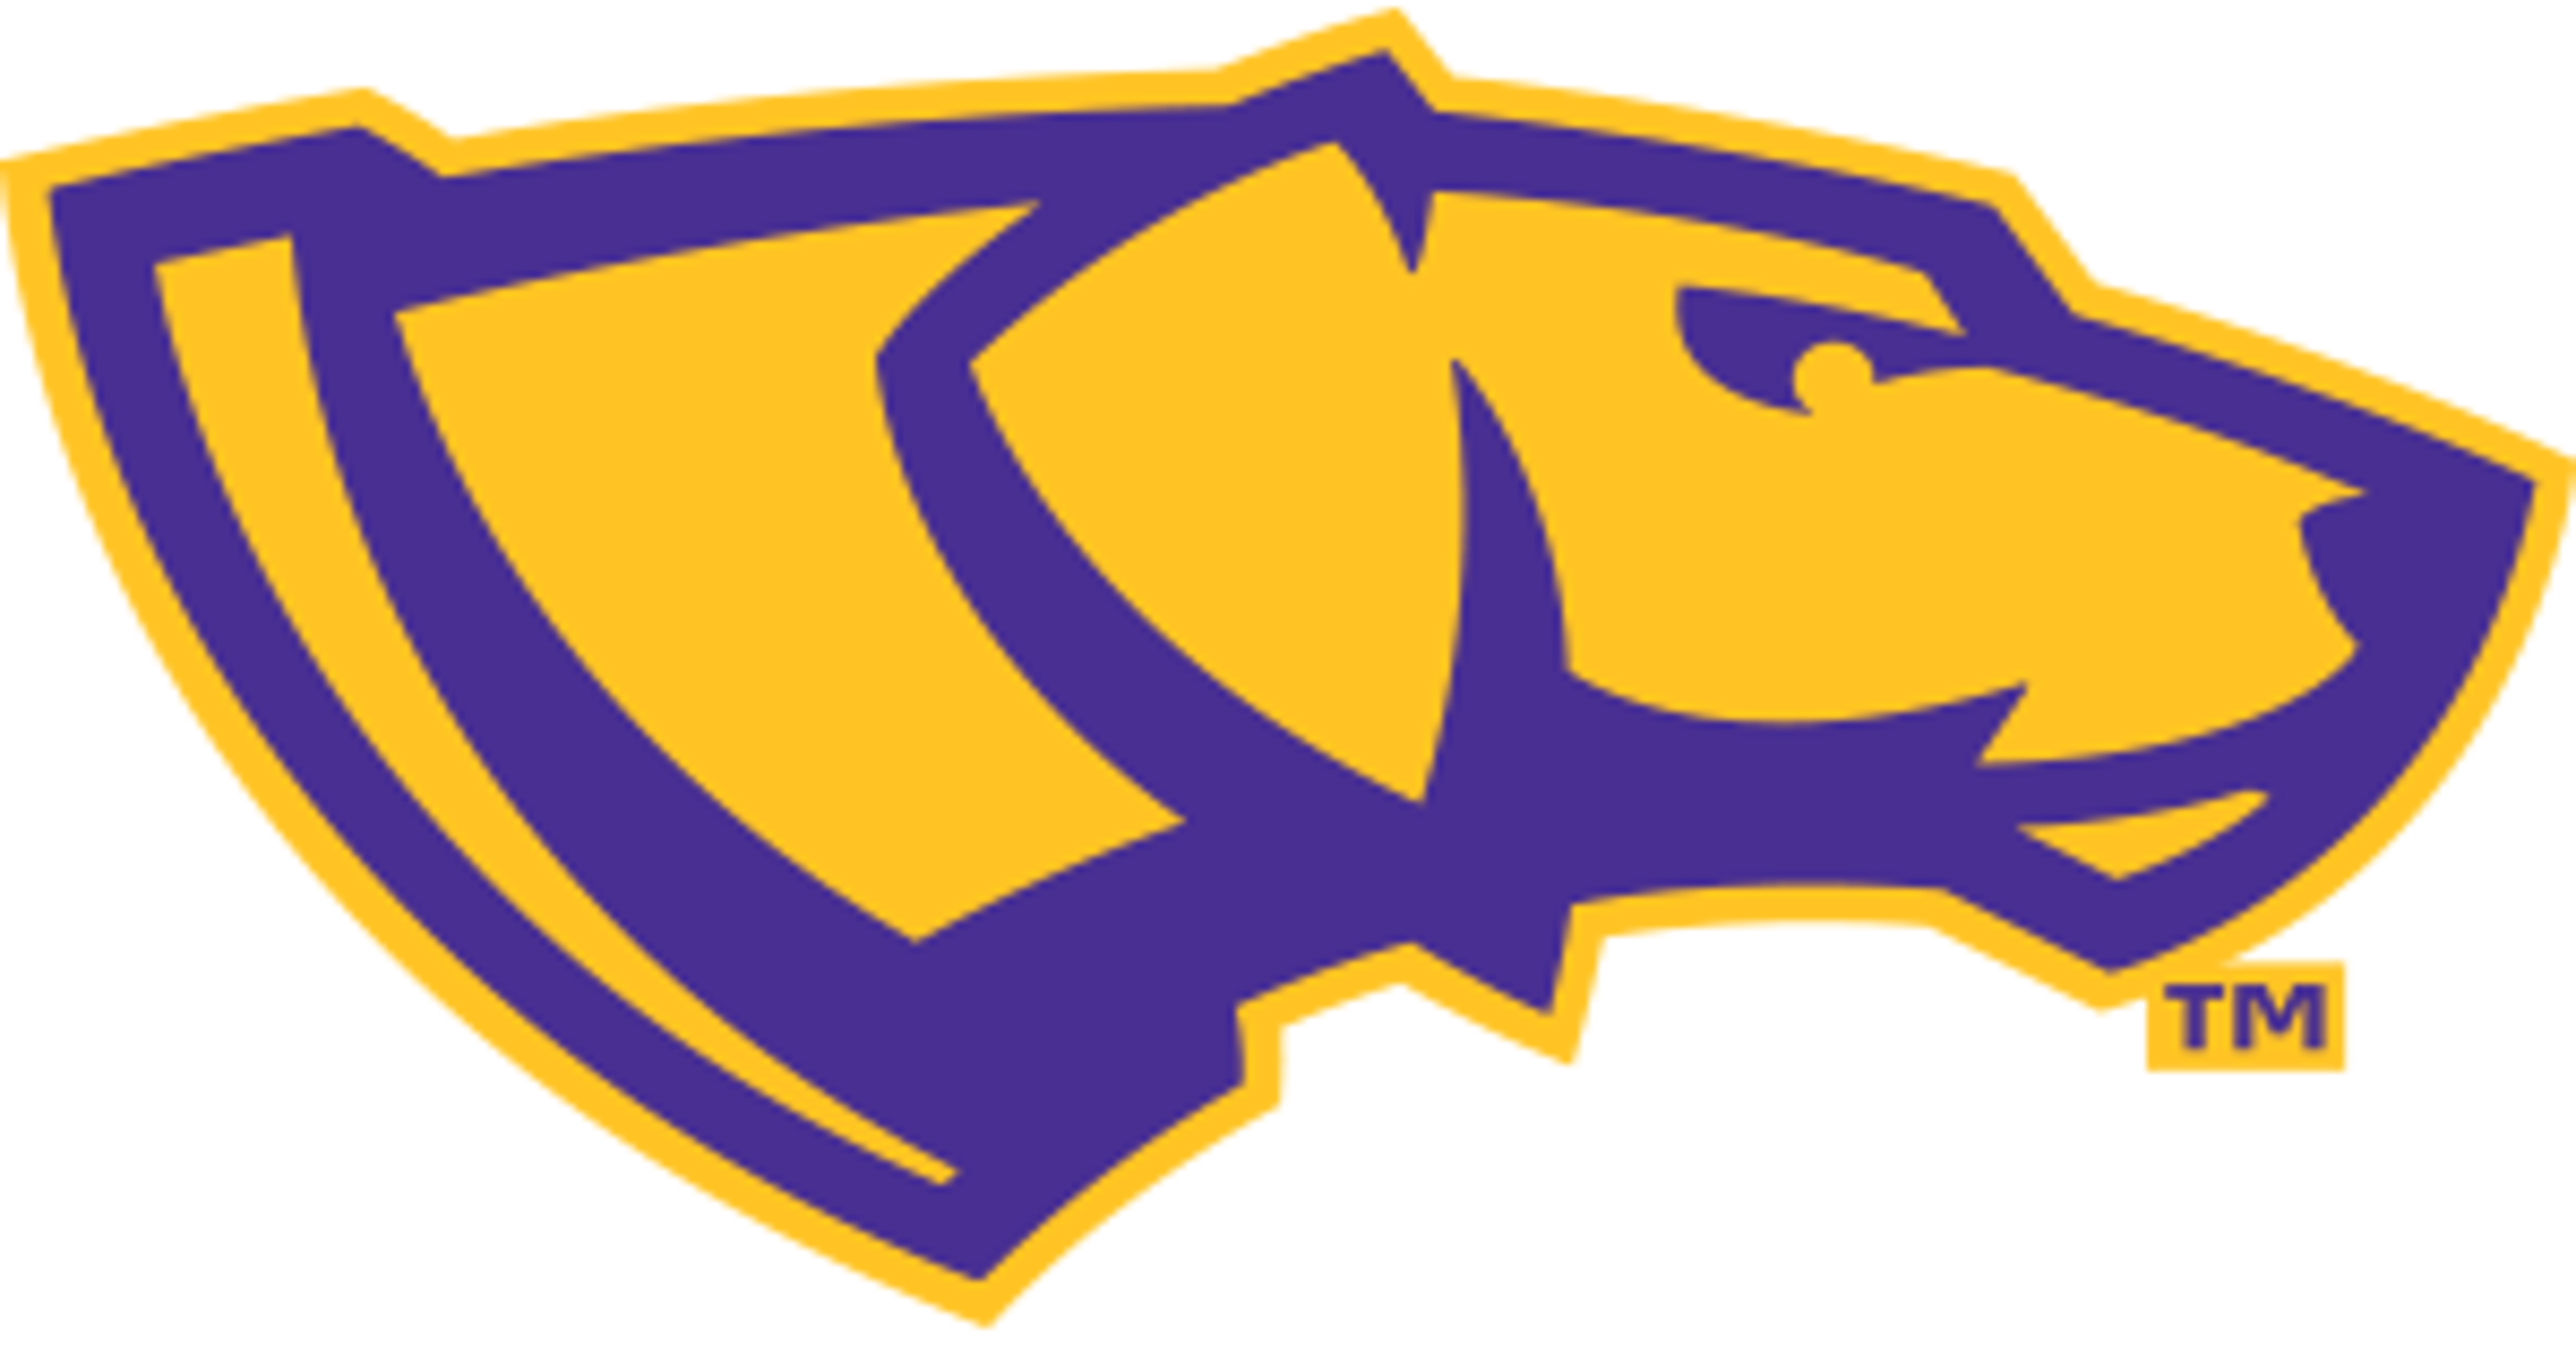 UWSP announces track and field schedule